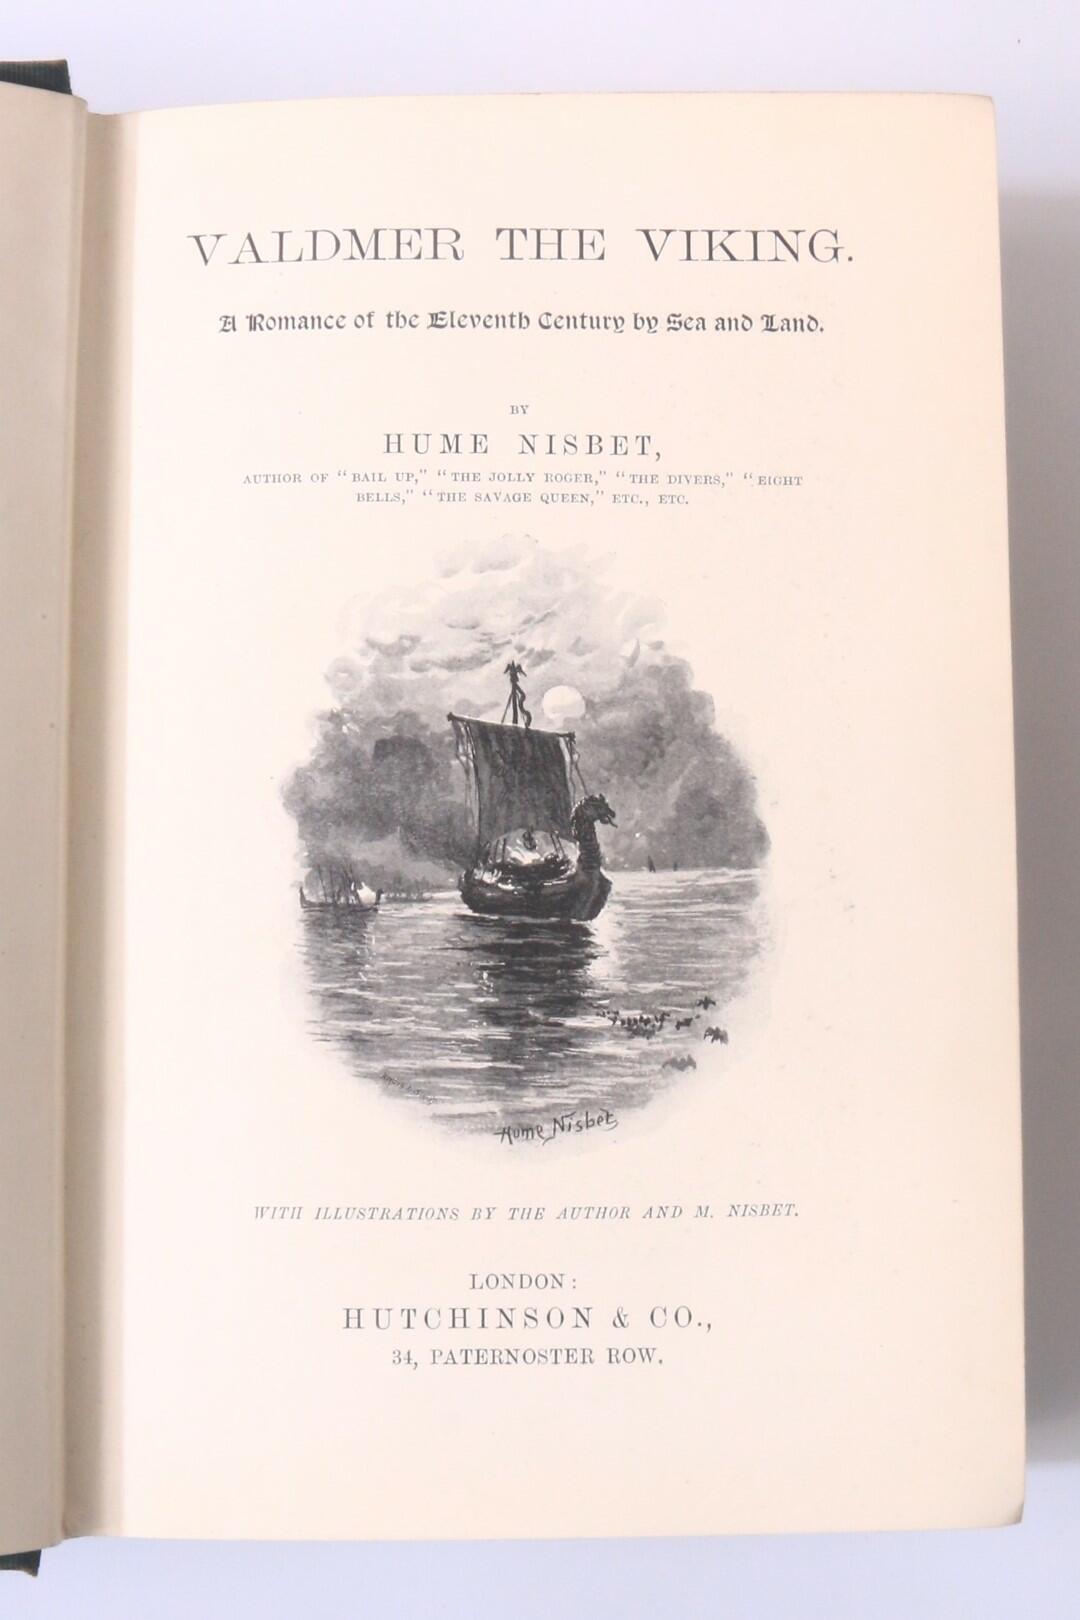 Hume Nisbet - Valdmer the Viking; A Romance of the Eleventh Century by Sea and Land - Hutchinson, n.d. [1893], First Edition.